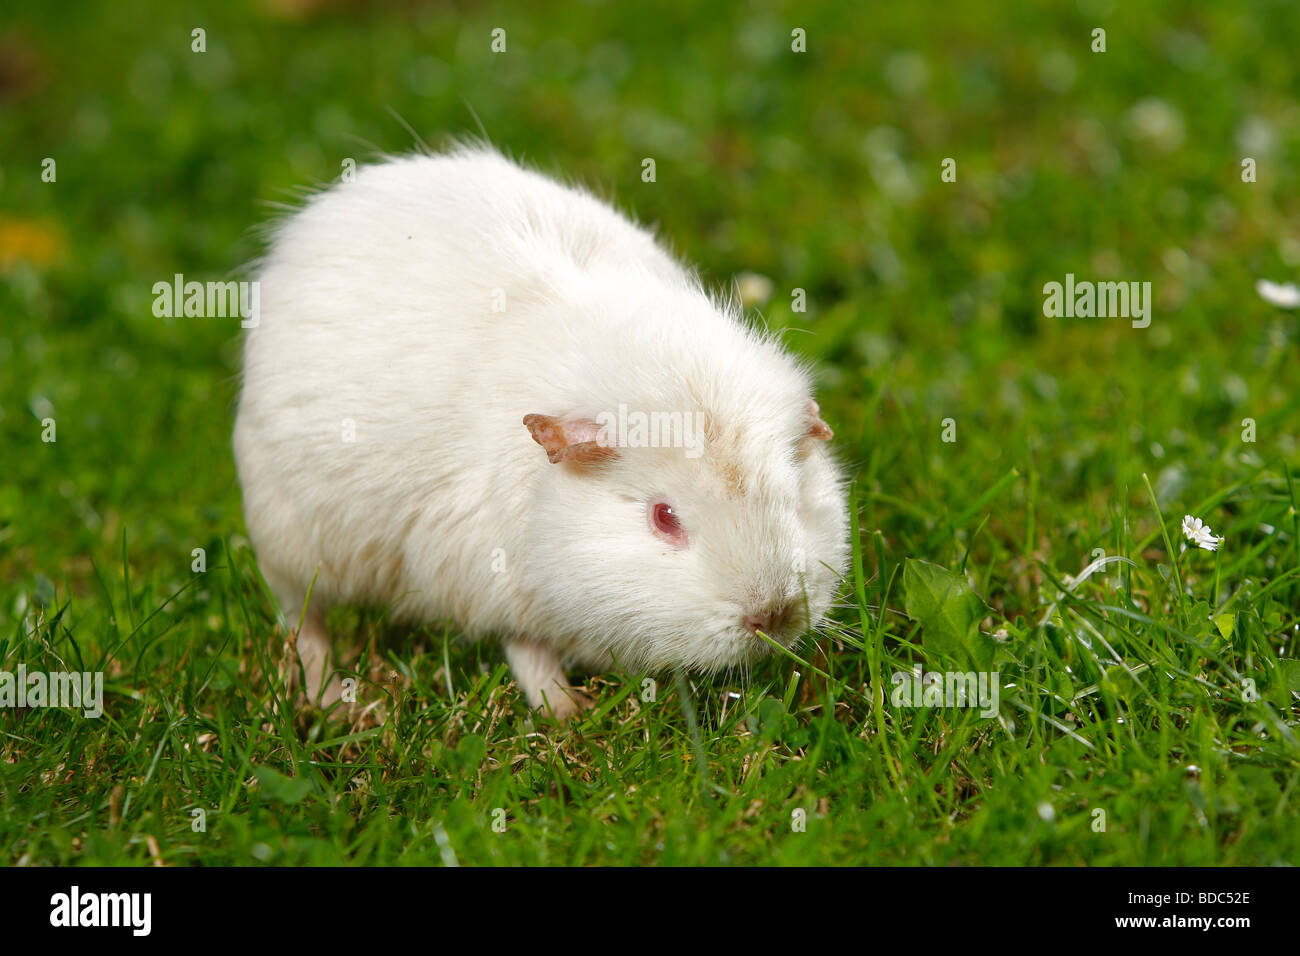 Guinea Pig 10 years old Stock Photo